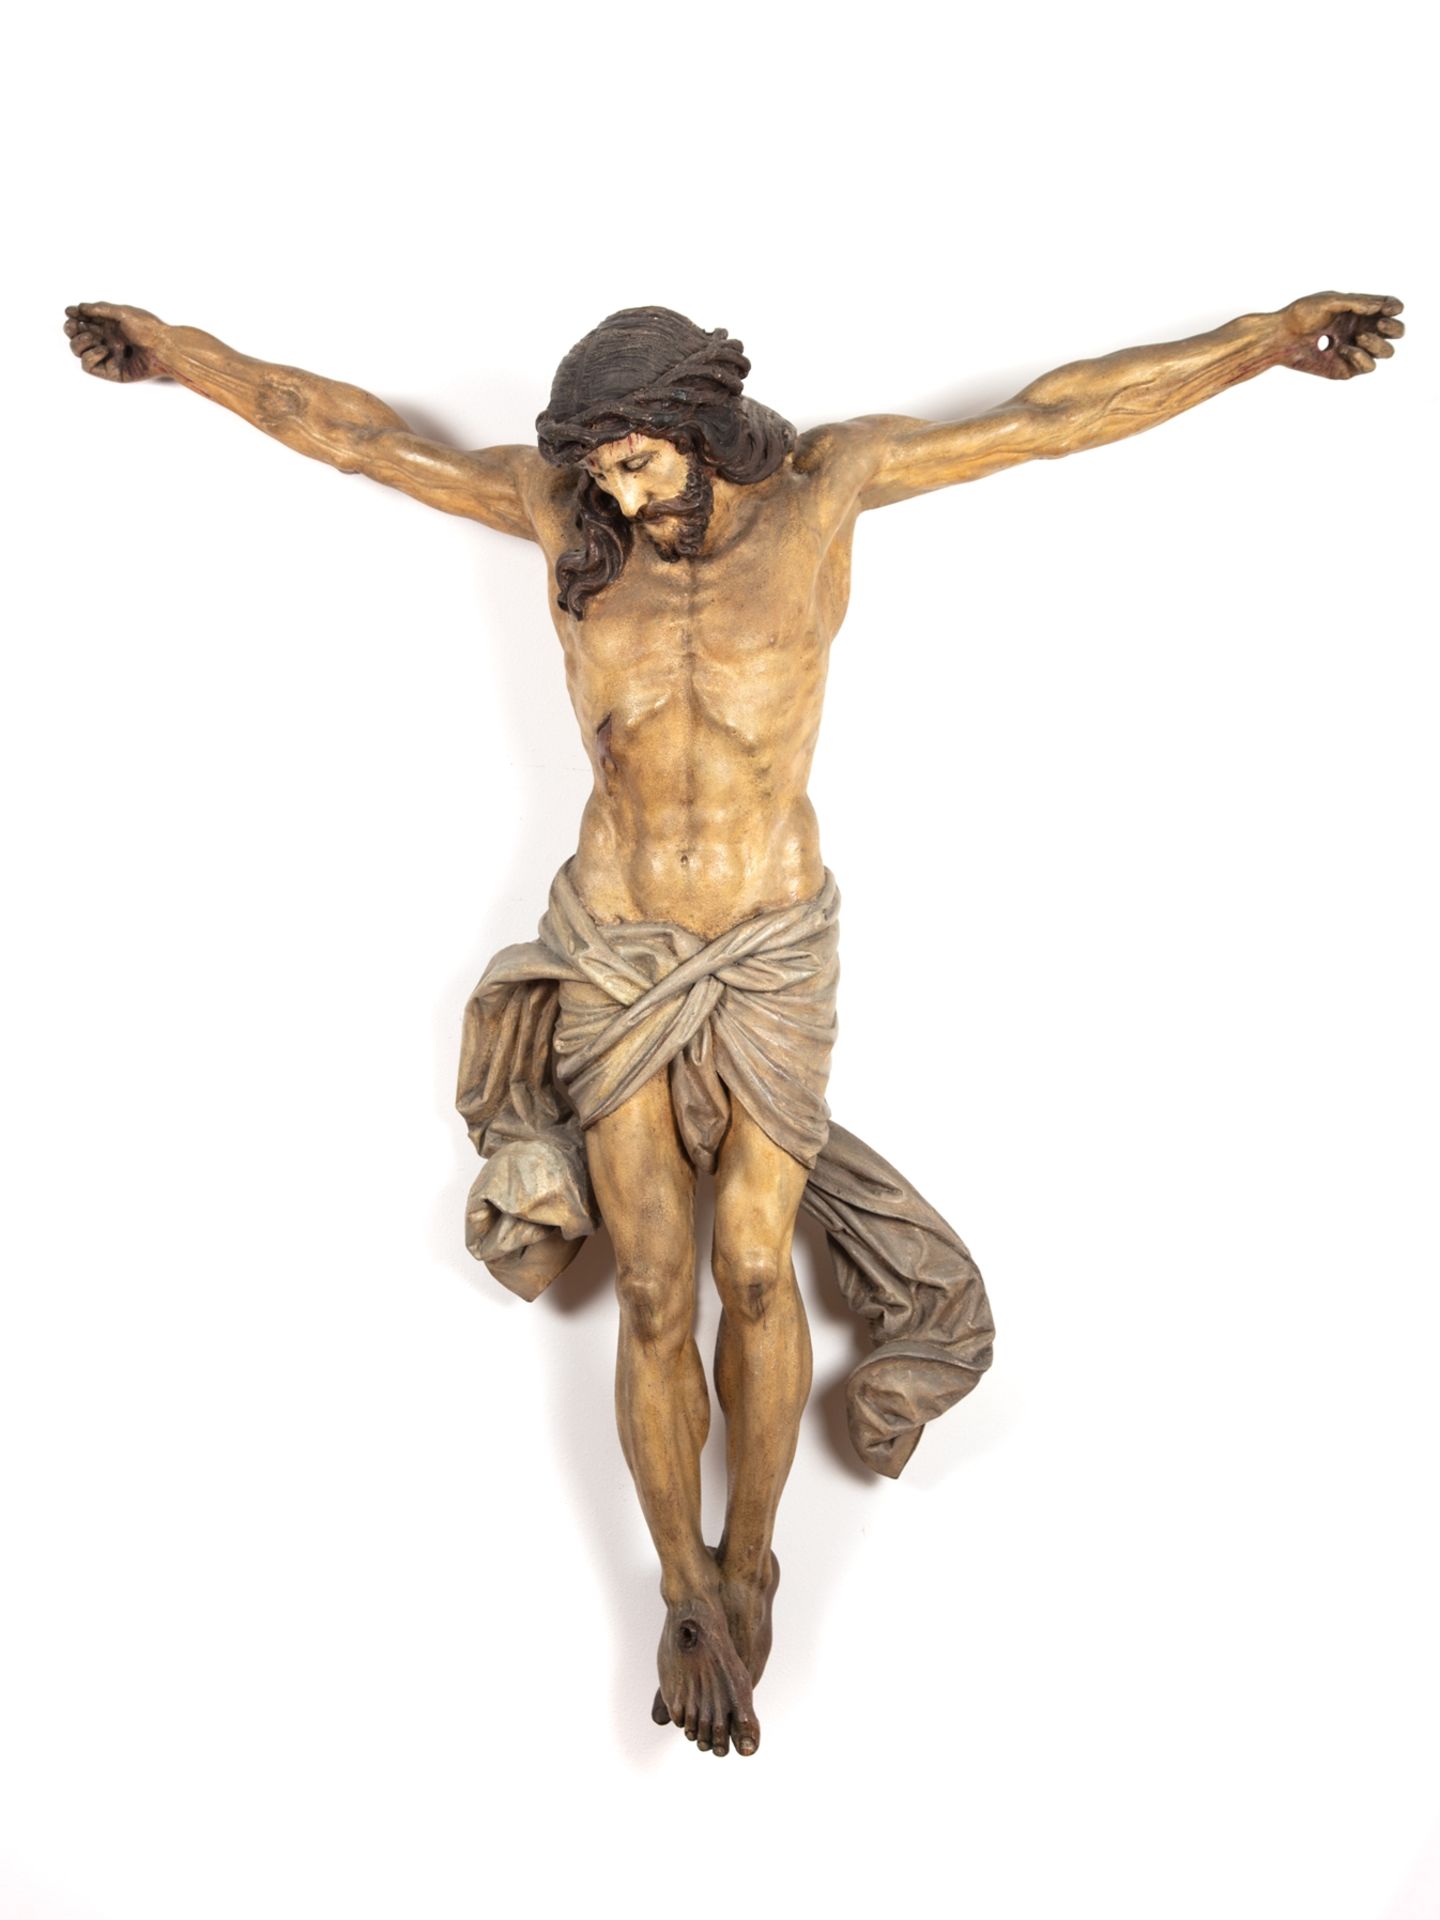 Wood carving Jesus figure in imposing large format around 1880 - Image 10 of 10